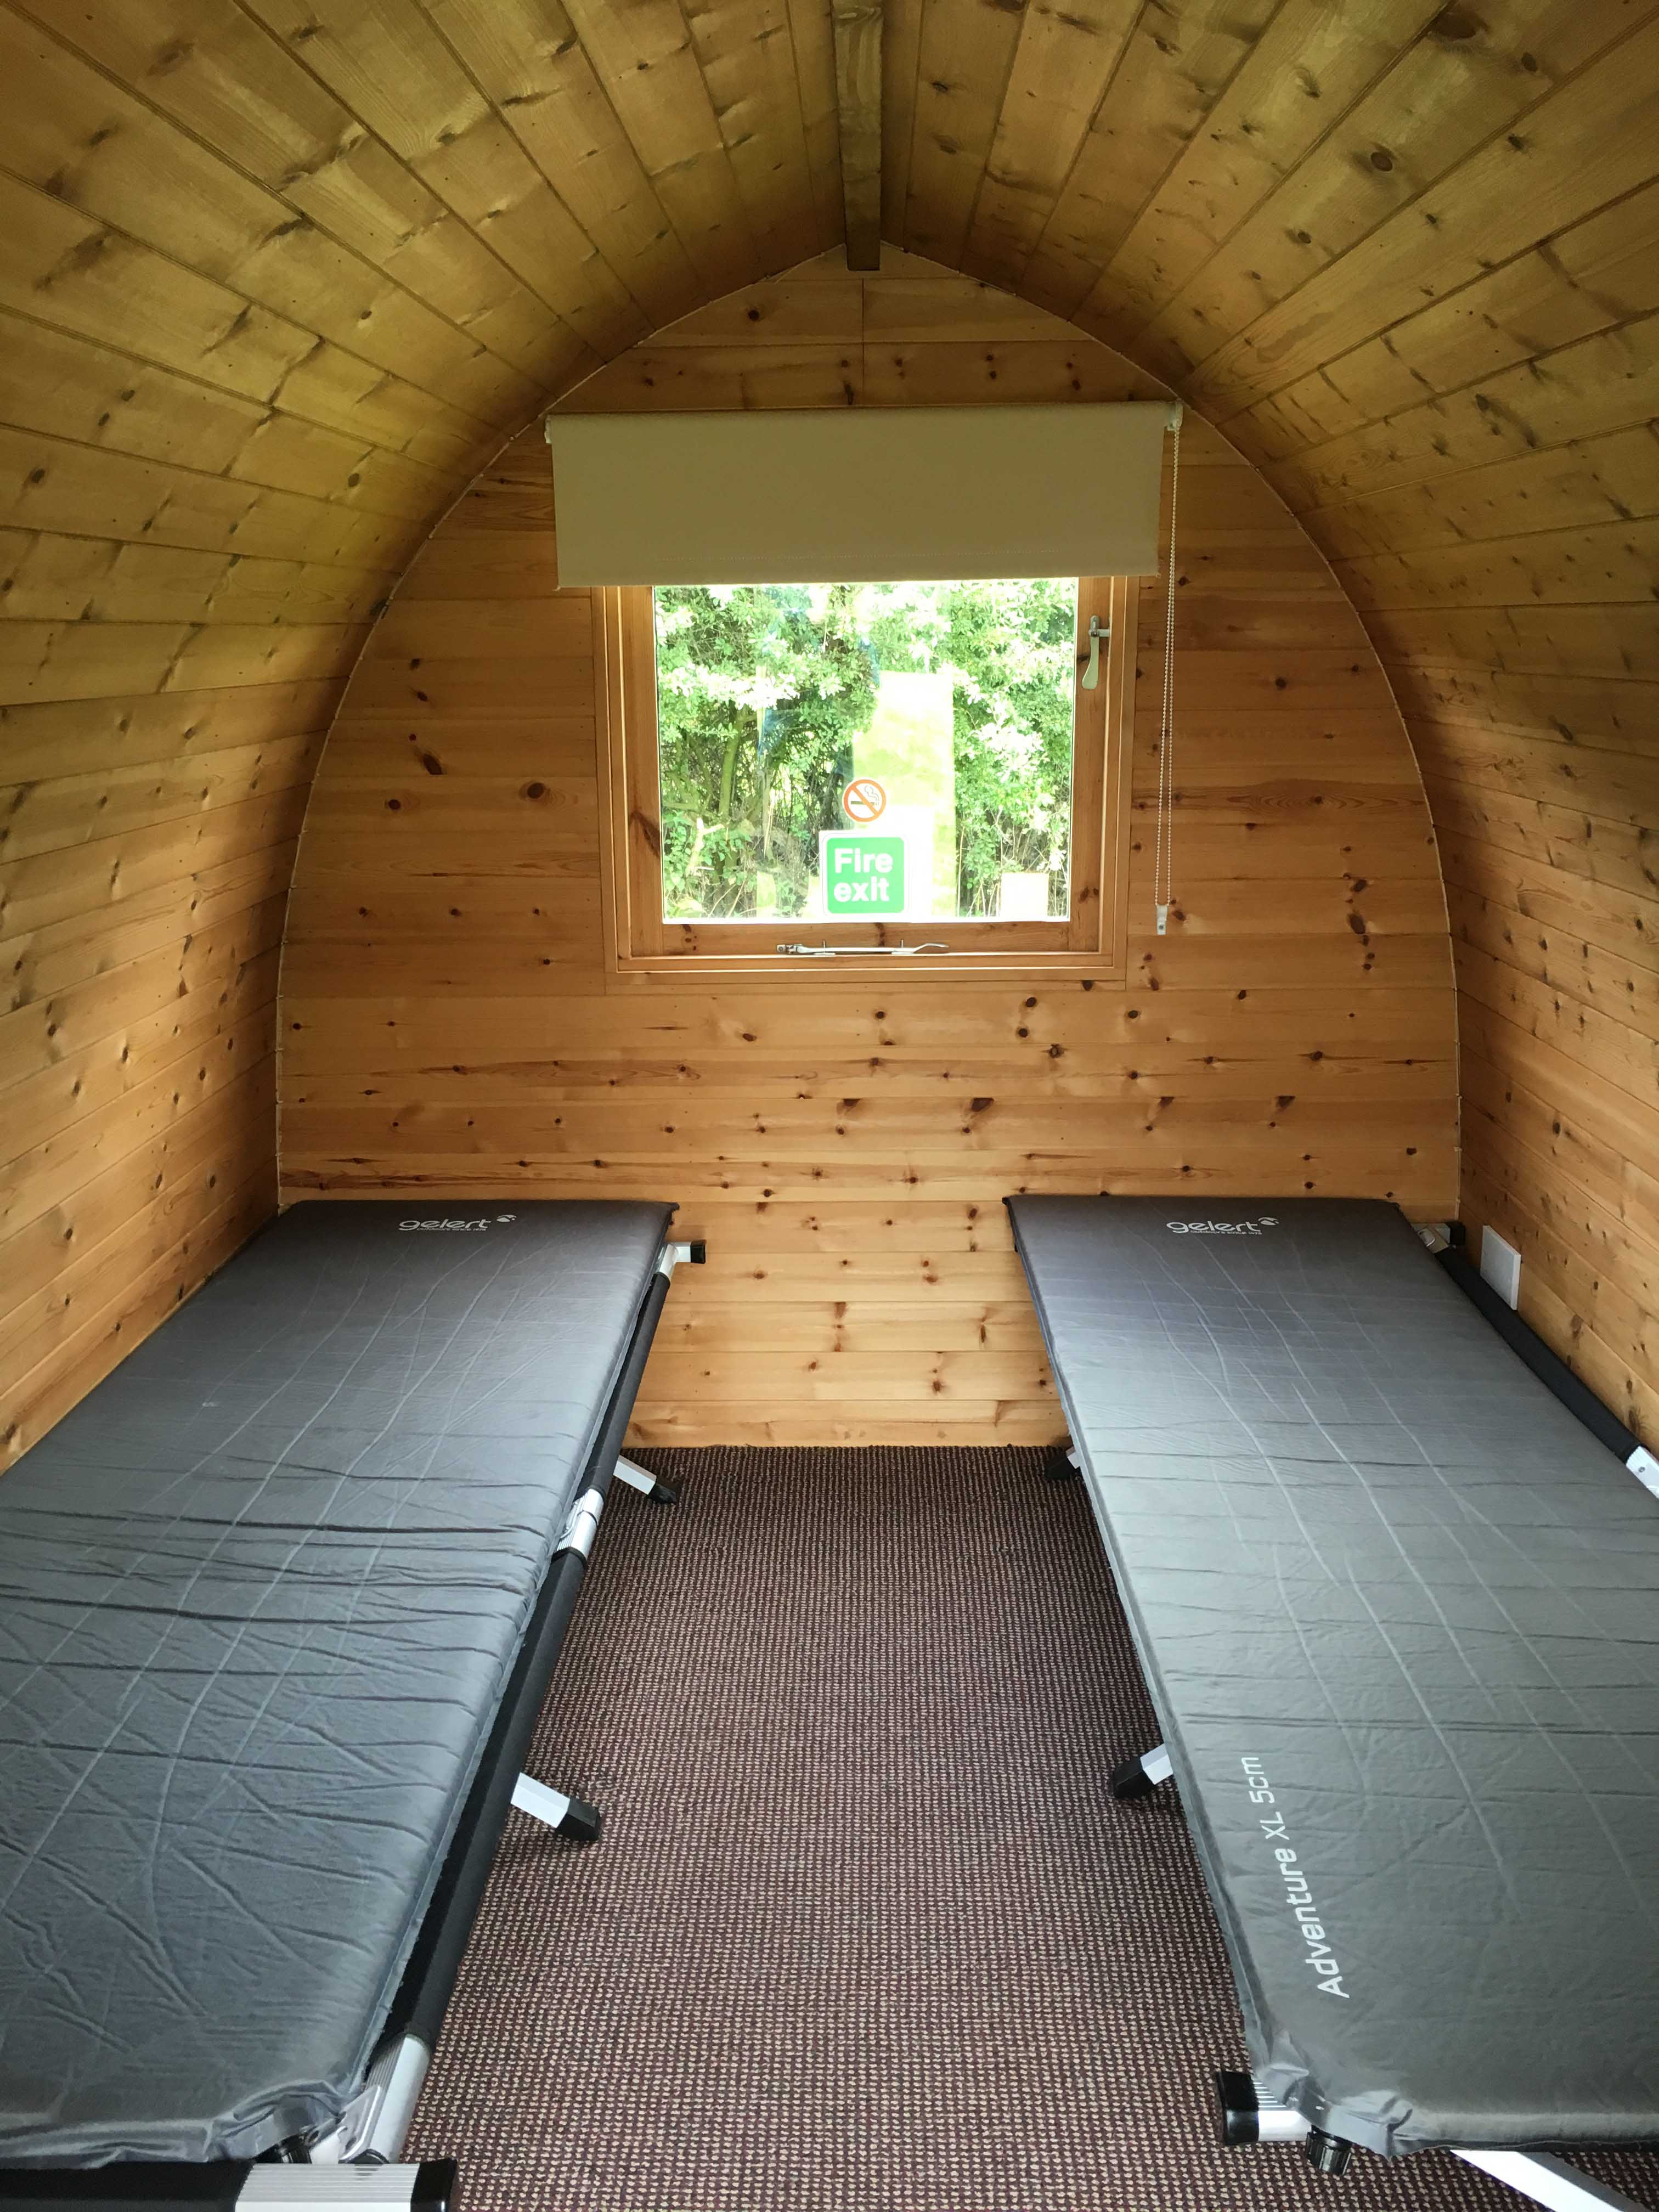 Pitch and Canvas | Glamping and Camping in Cheshire | Inside of acorn pod